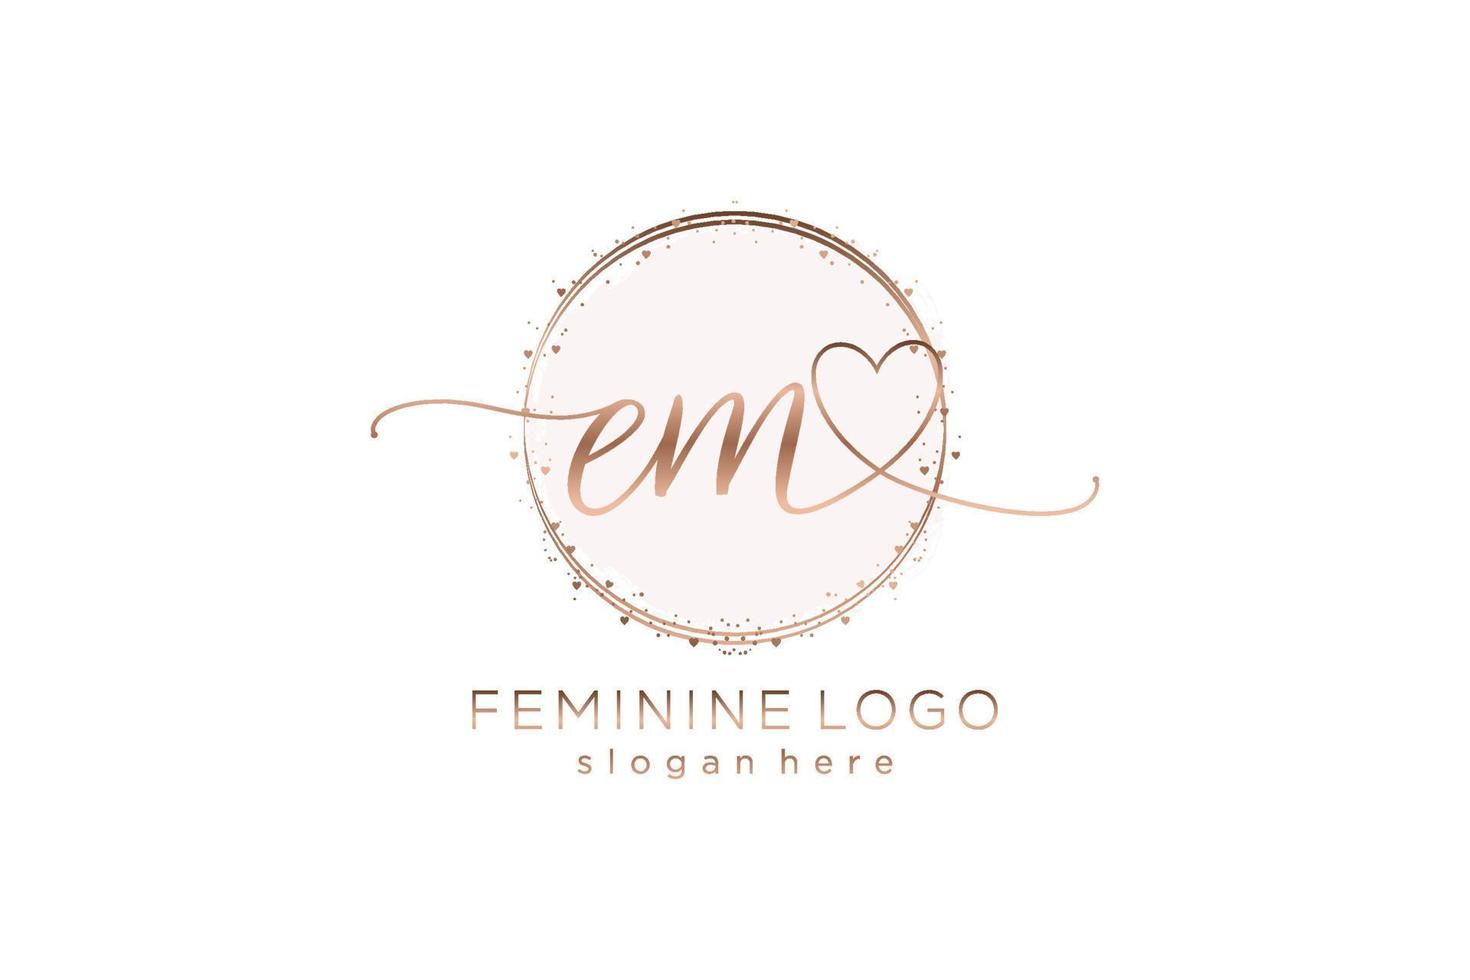 Initial EM handwriting logo with circle template vector logo of initial wedding, fashion, floral and botanical with creative template.